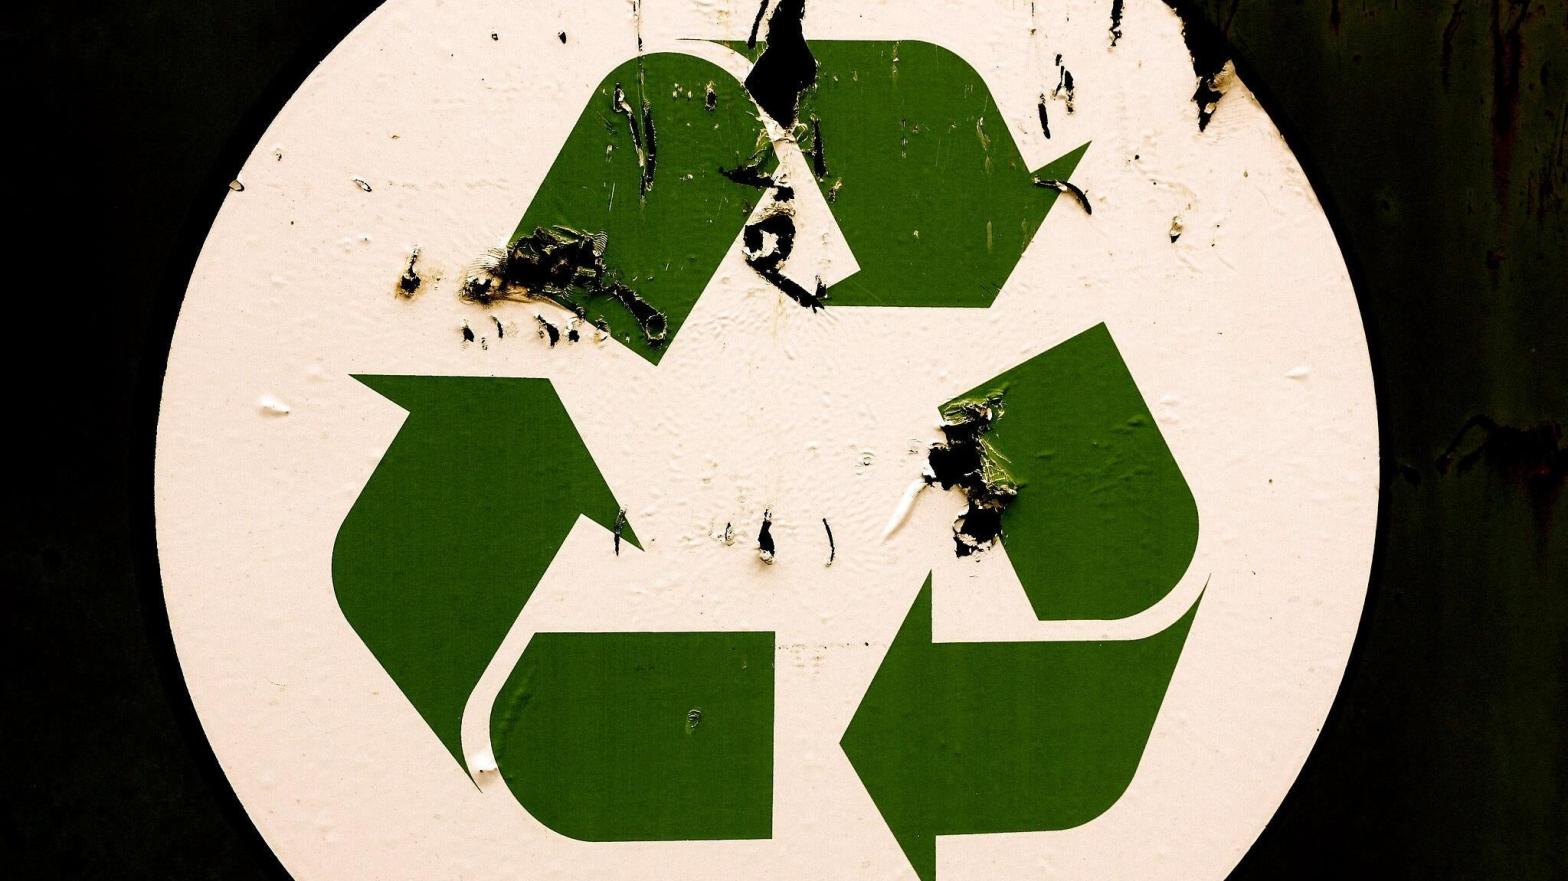 How the Recycling Symbol Became Meaningless